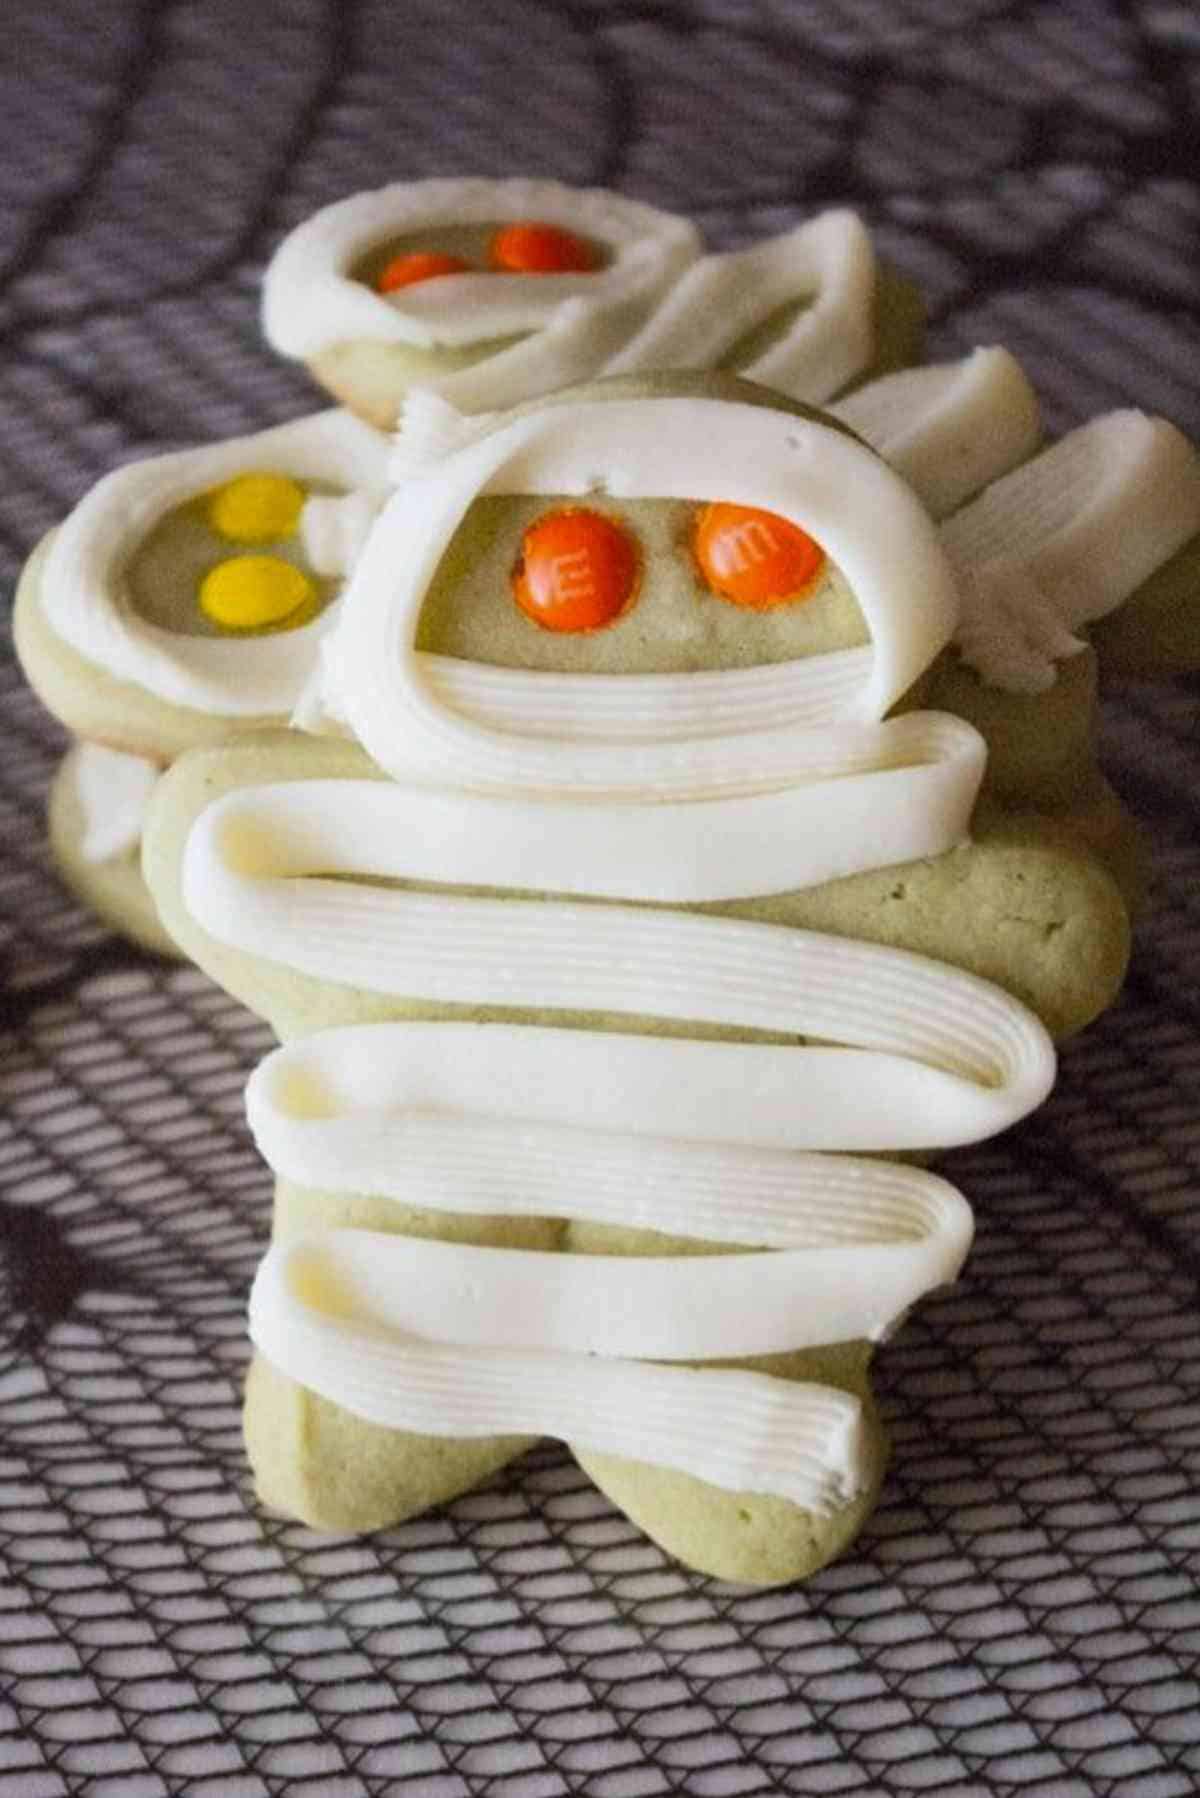 A yummy mummy sugar cookie with a cute mummy face ready to eat!